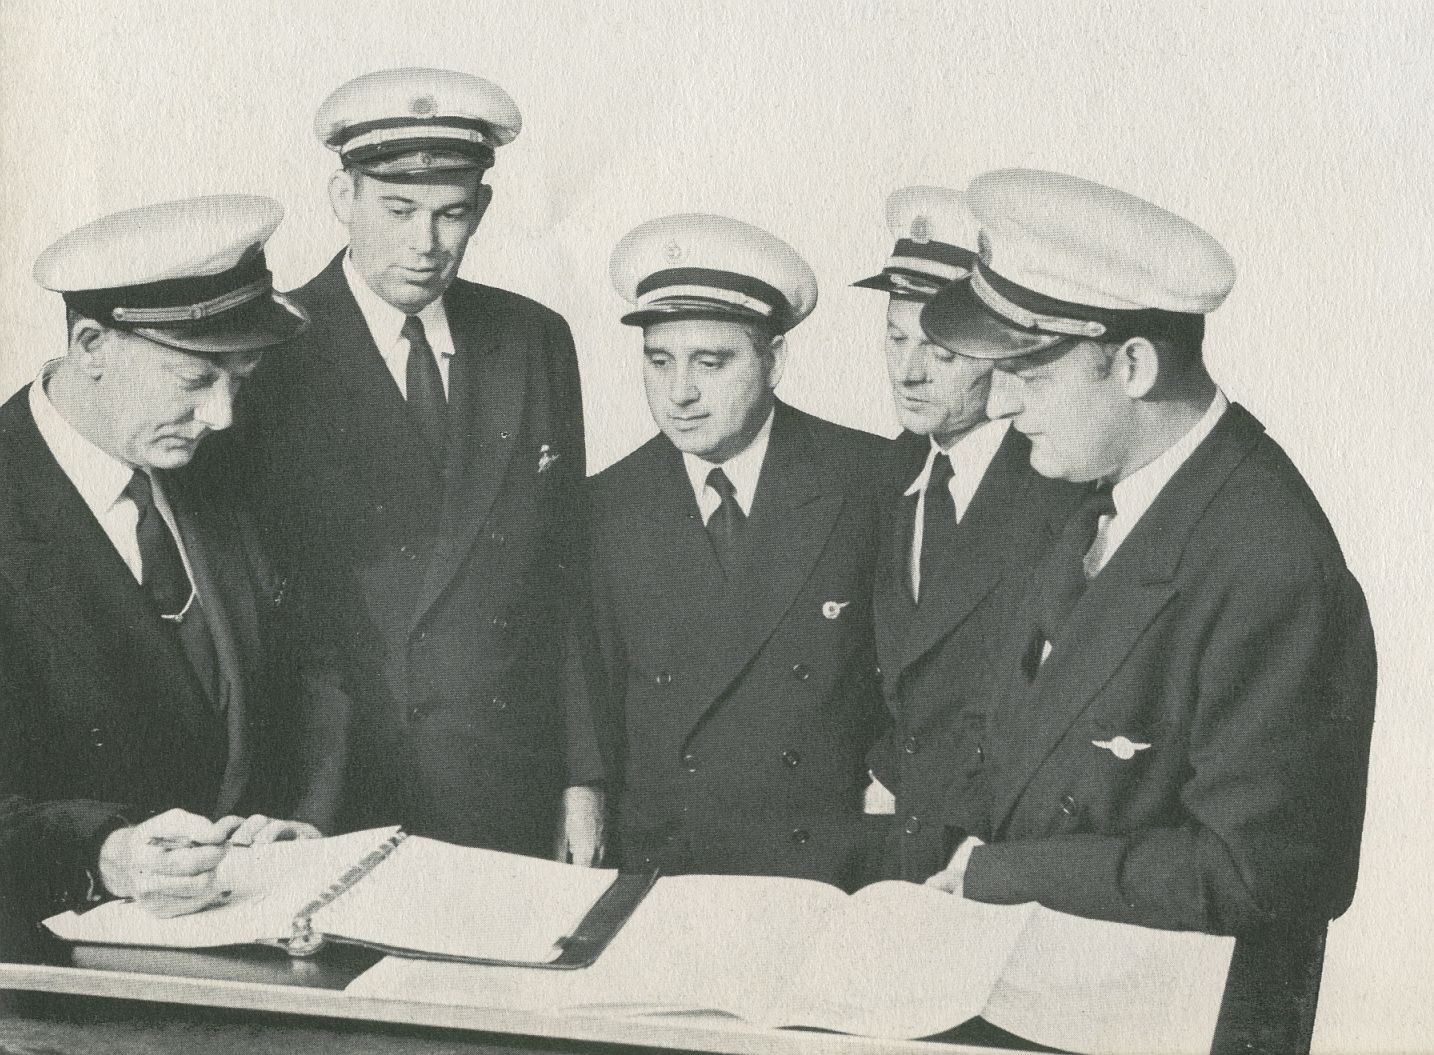 1956 Pan Am pilots gather before a flight to discuss weather and the route plan.  Pilot Victor Grubbs is second from left.